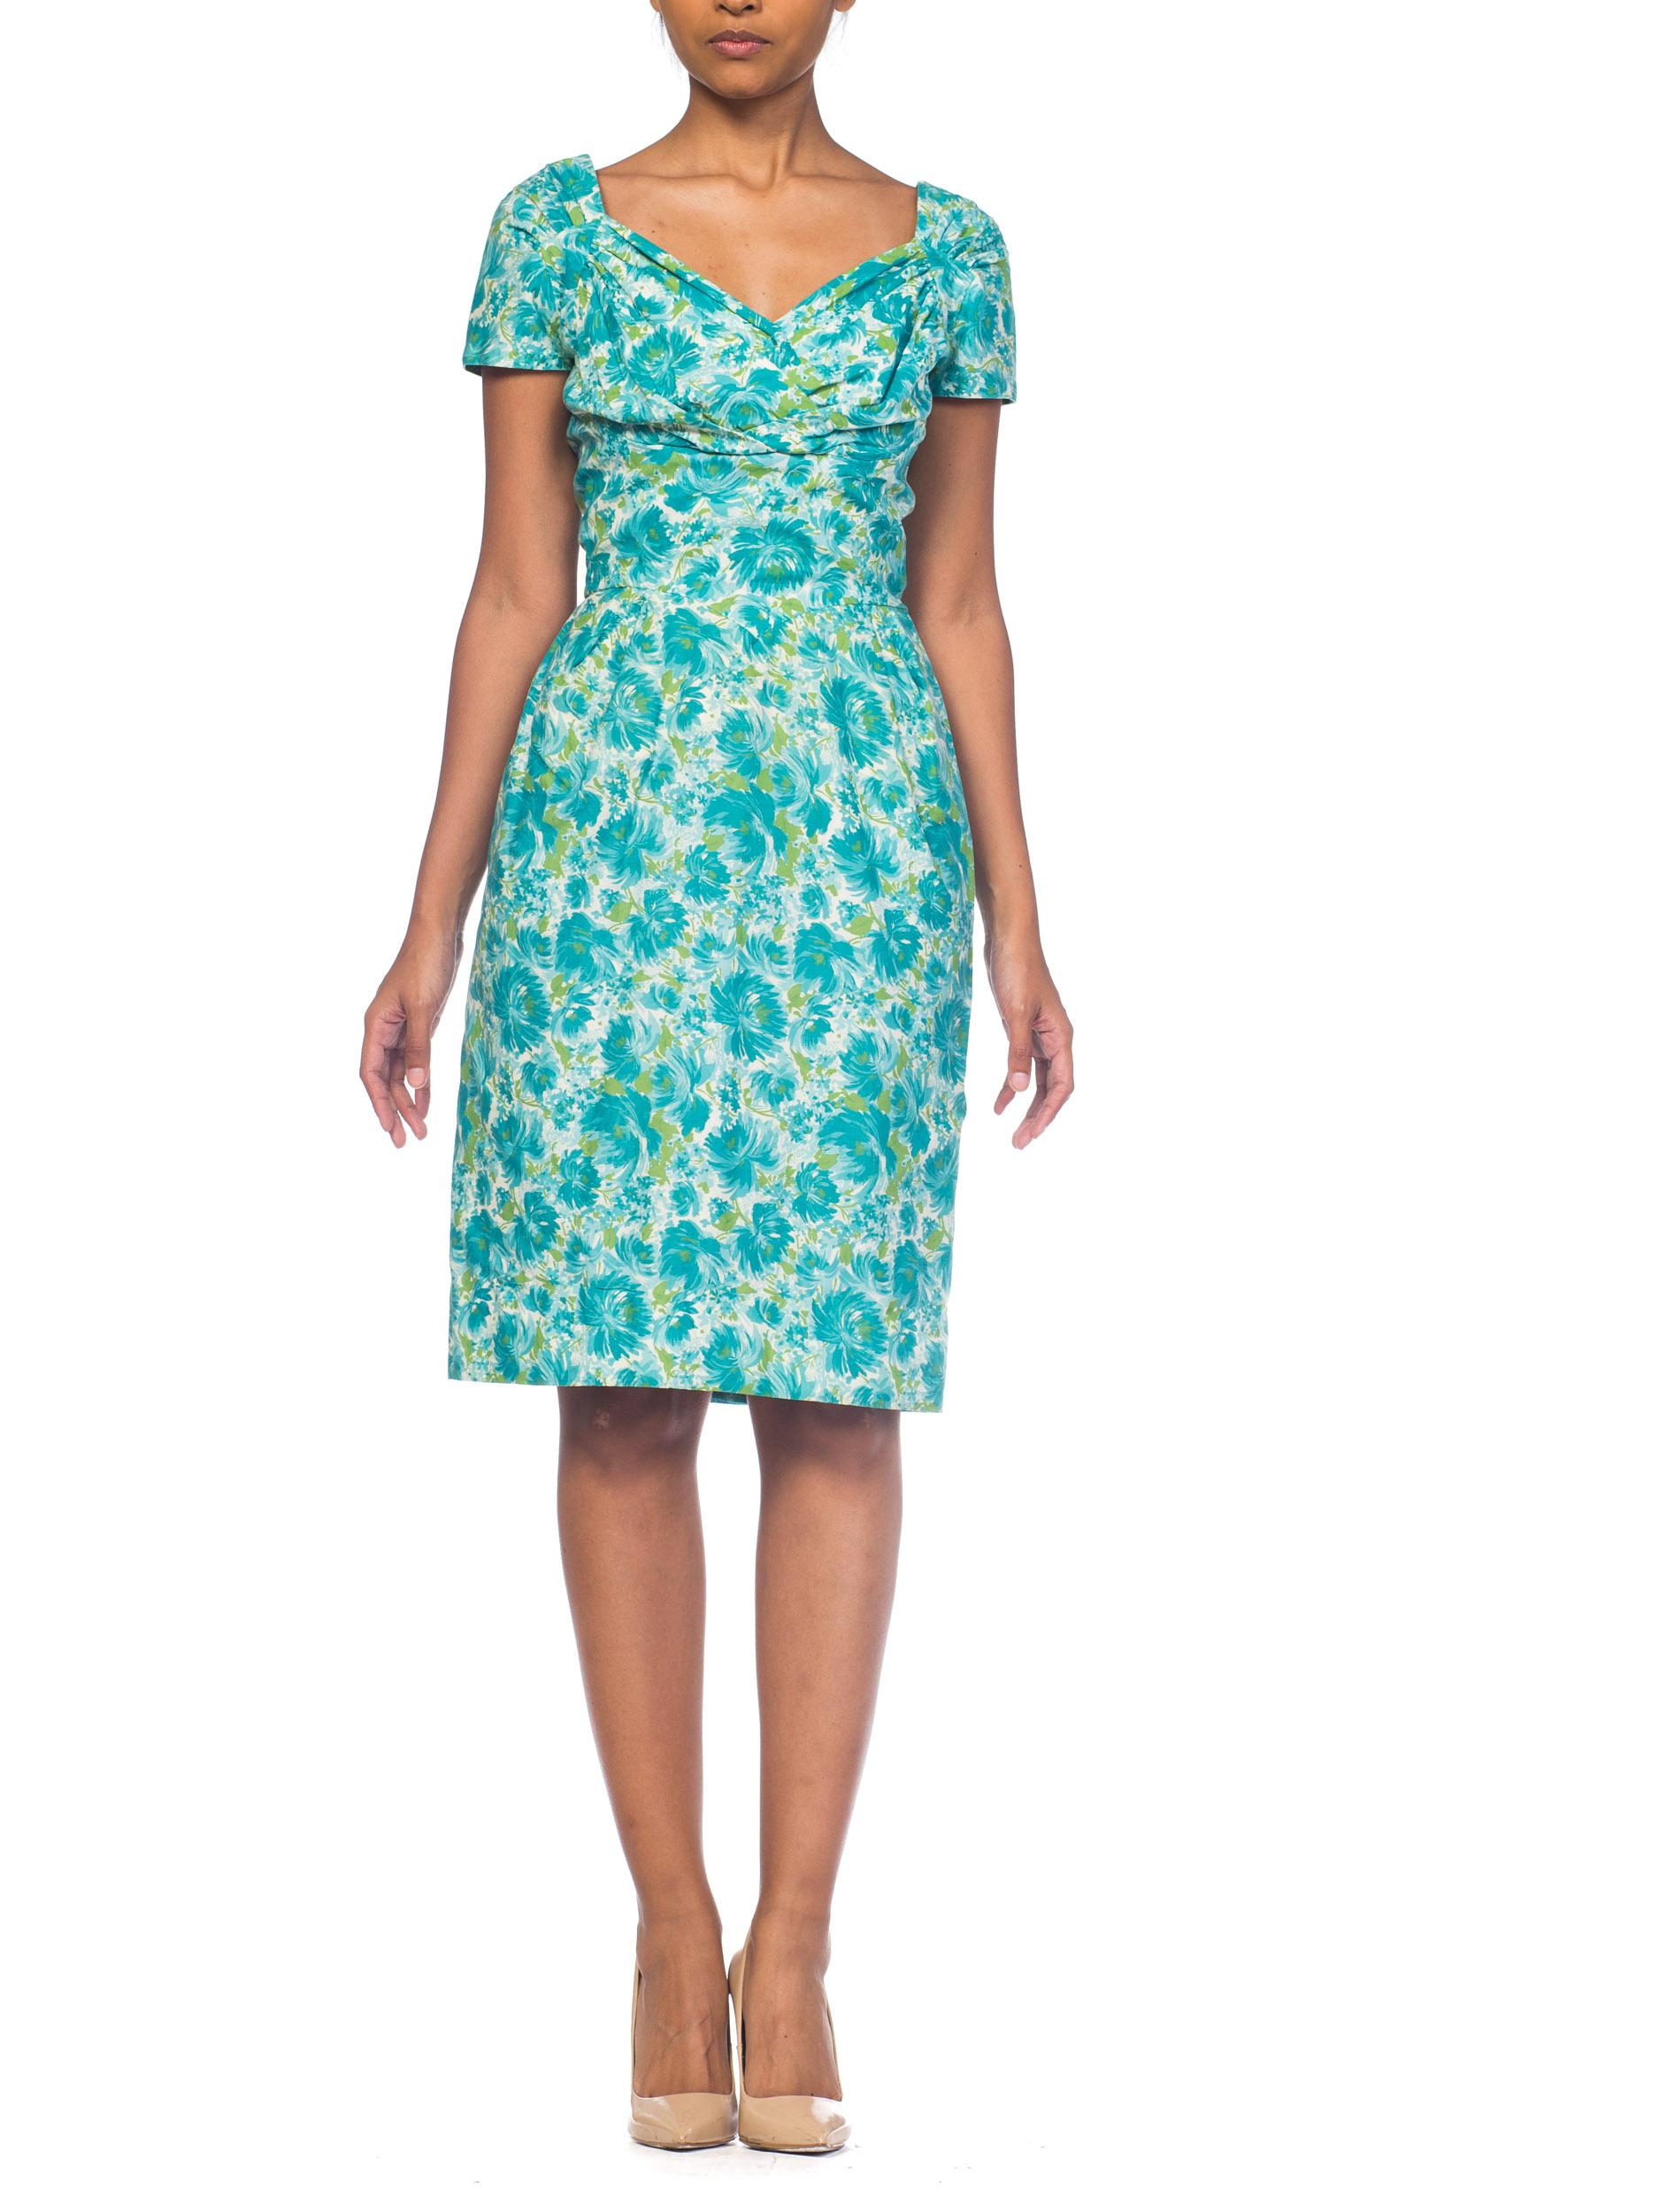 1950S Blue & Green Floral Cotton Dress With Draped Vava-Voom Neckline For Sale 6